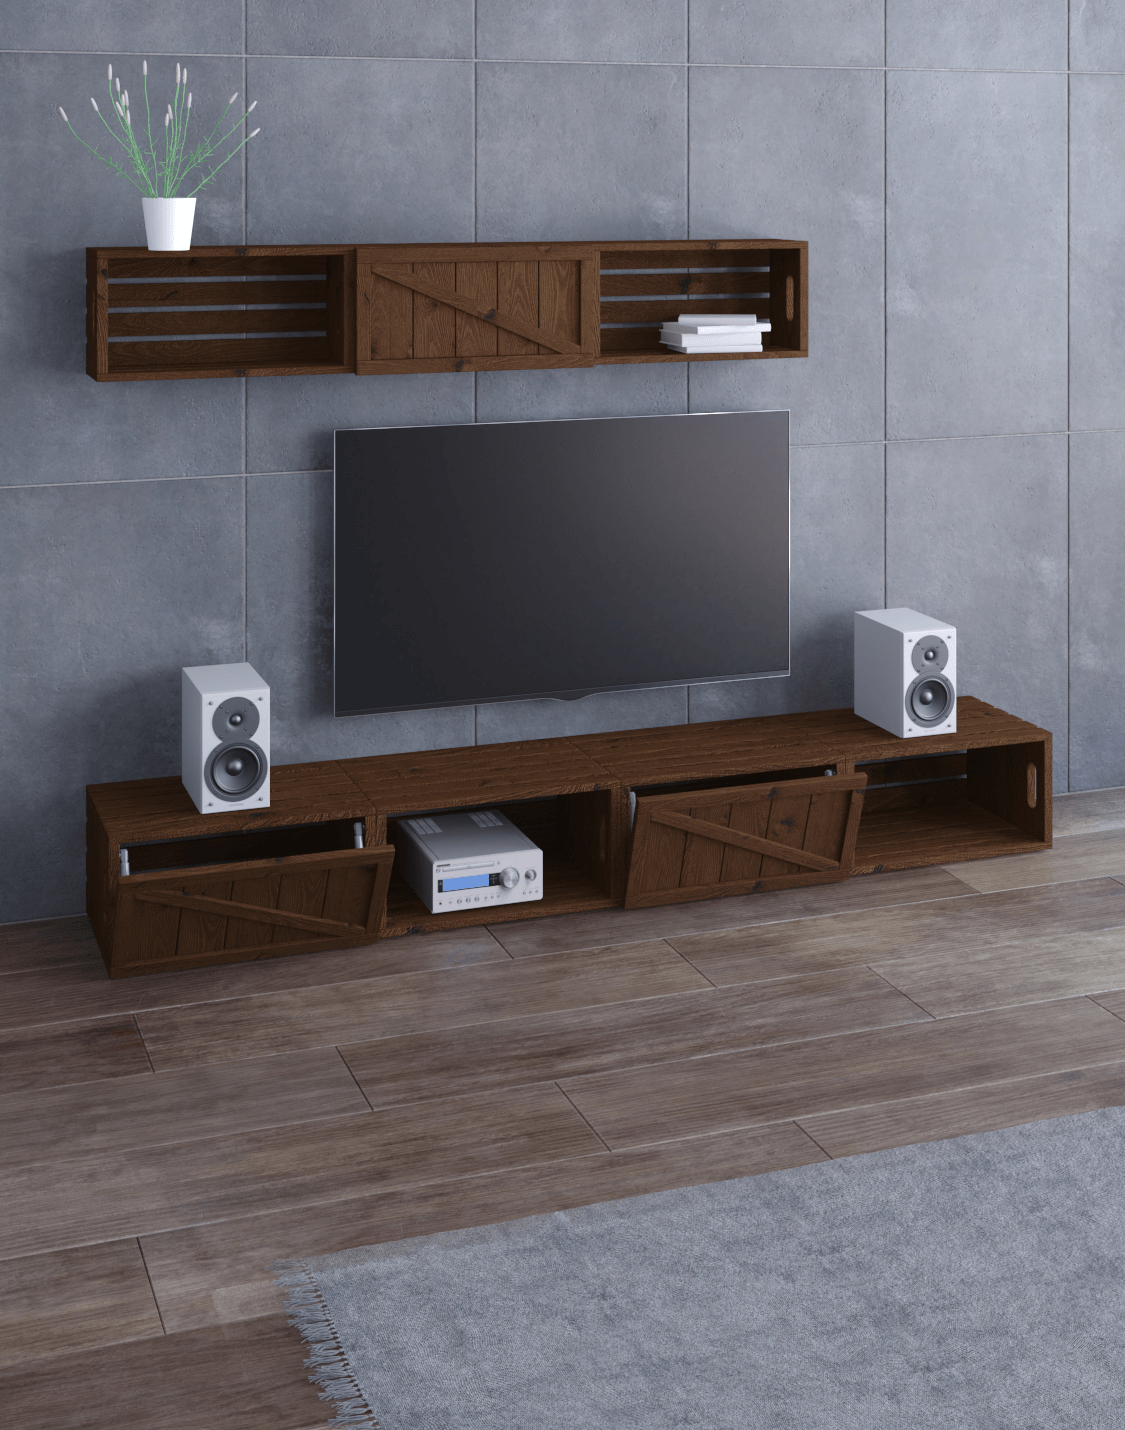 Smith TV Unit Modular And real wood furniture product